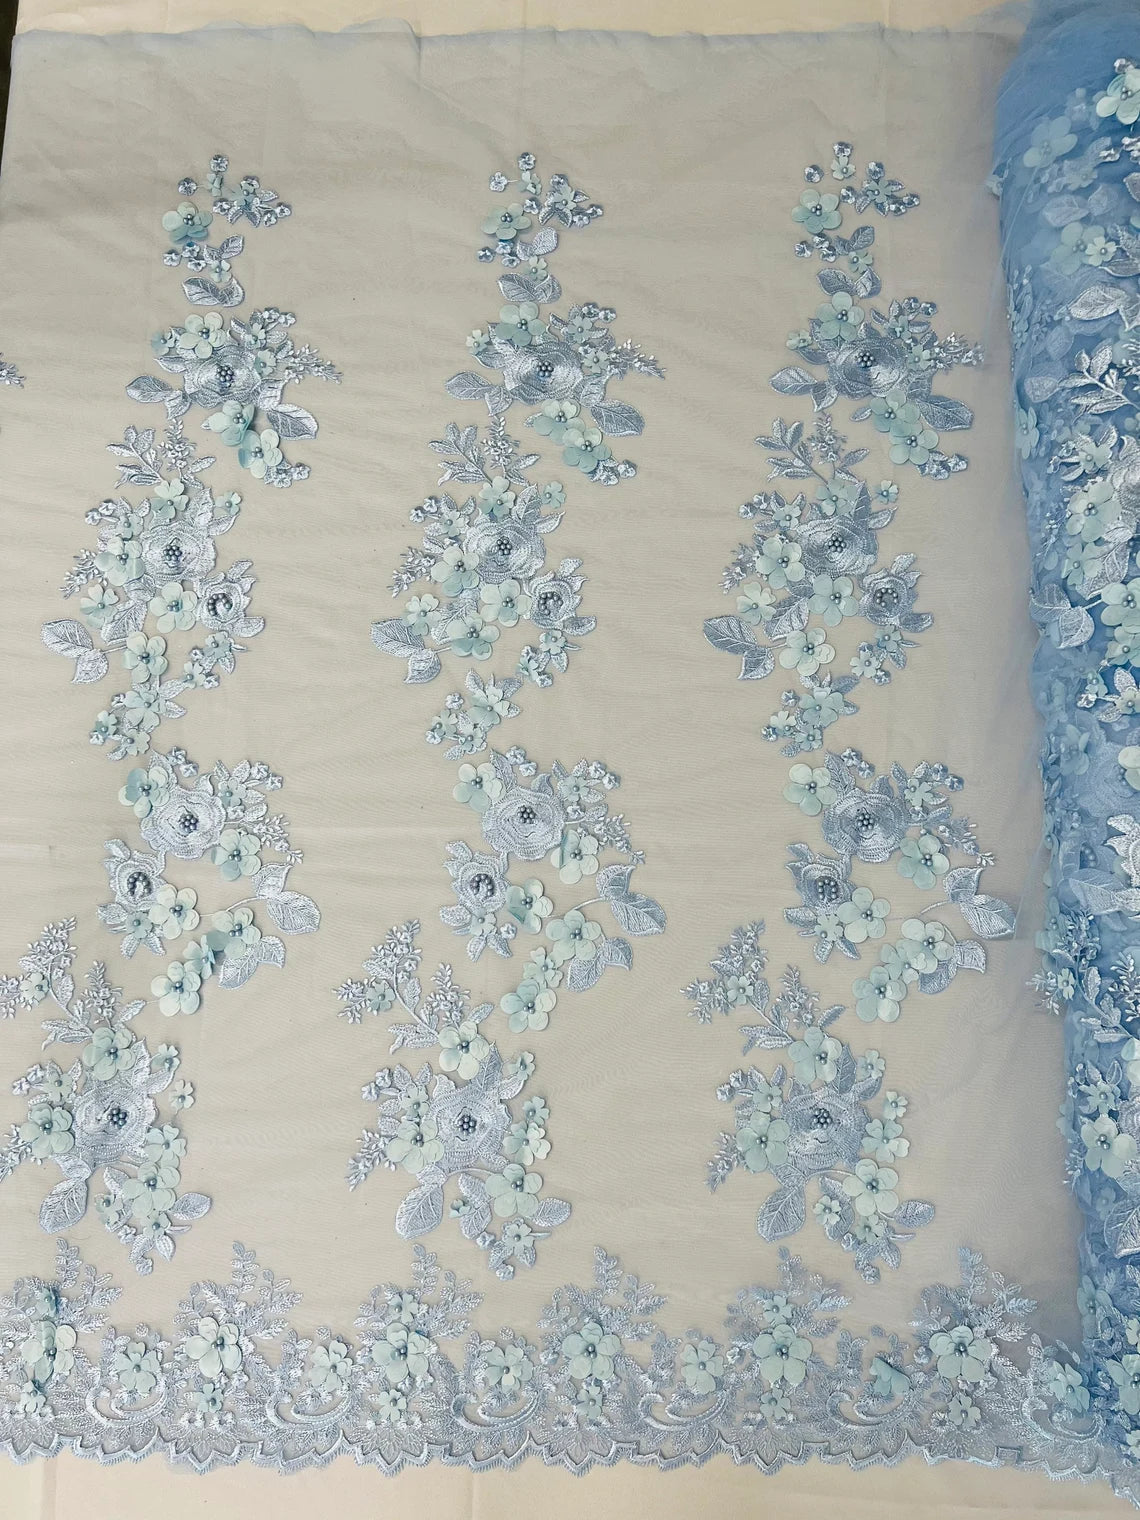 3D Flower Panels Fabric - Baby Blue - Flower Panels Bead Embroidered on Lace Fabric Sold By Yard